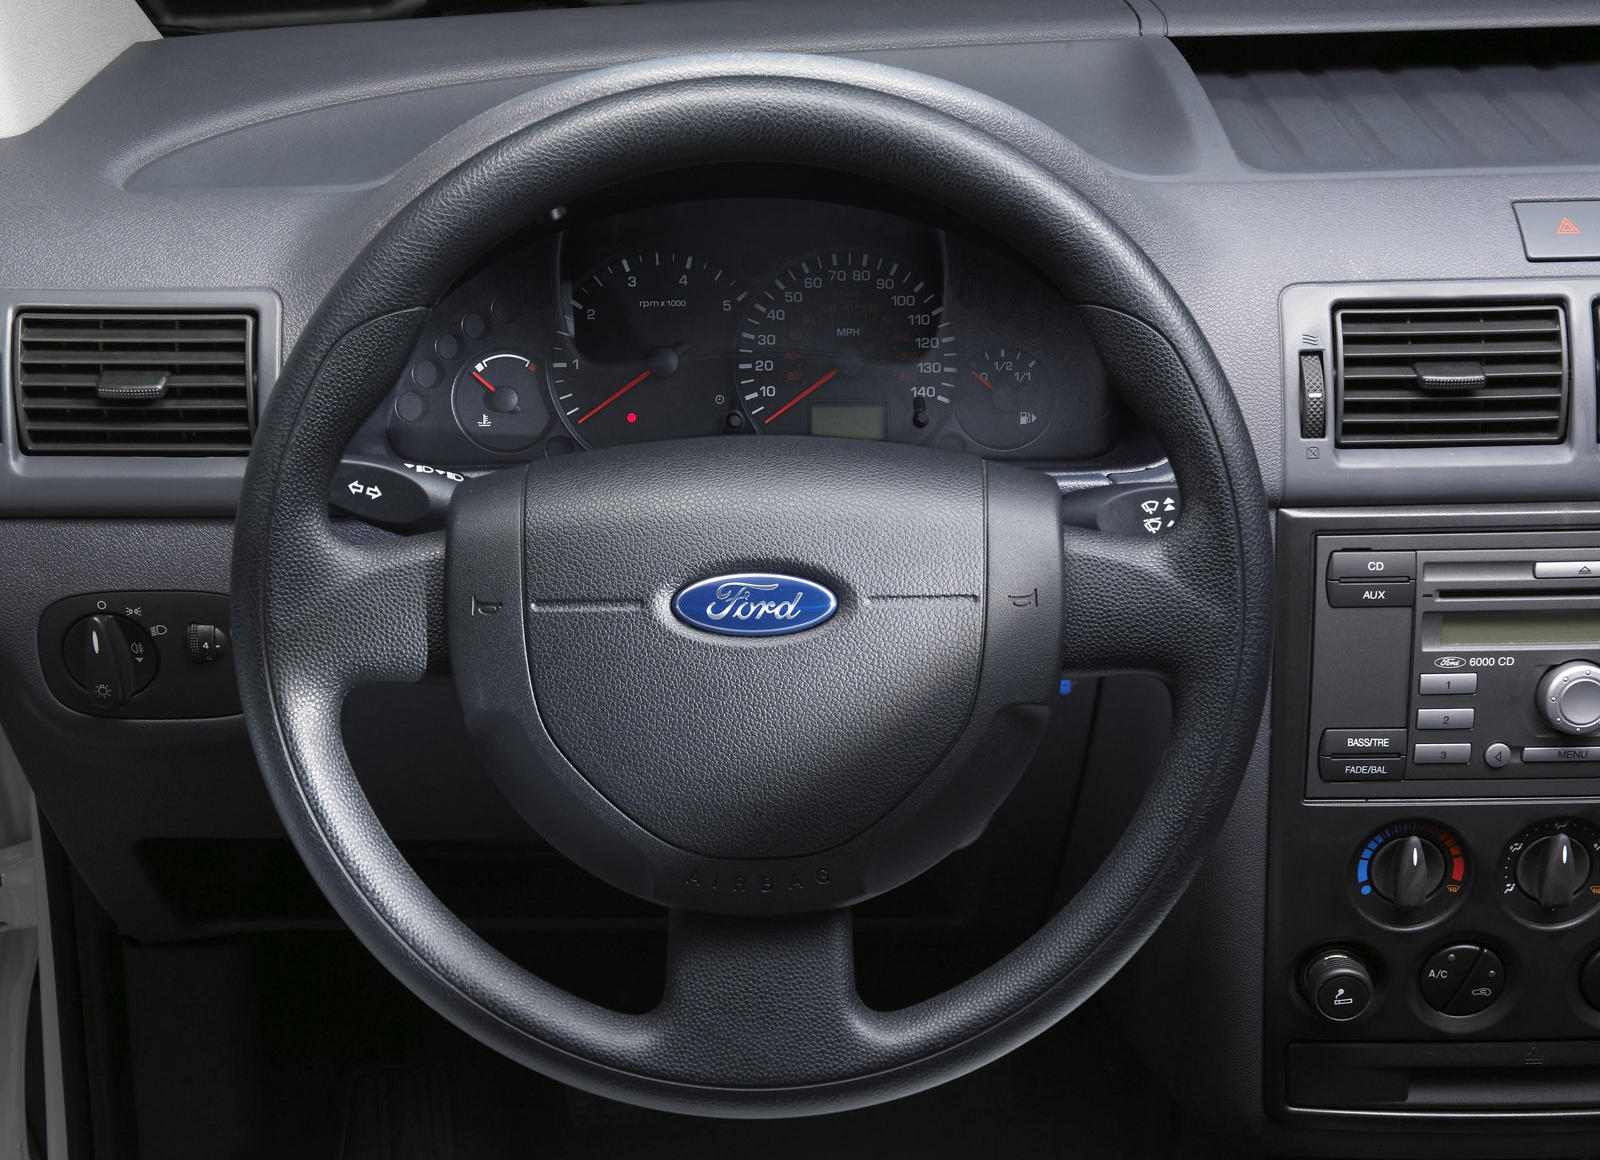 2012 Ford Transit Connect Cargo Van Dashboard